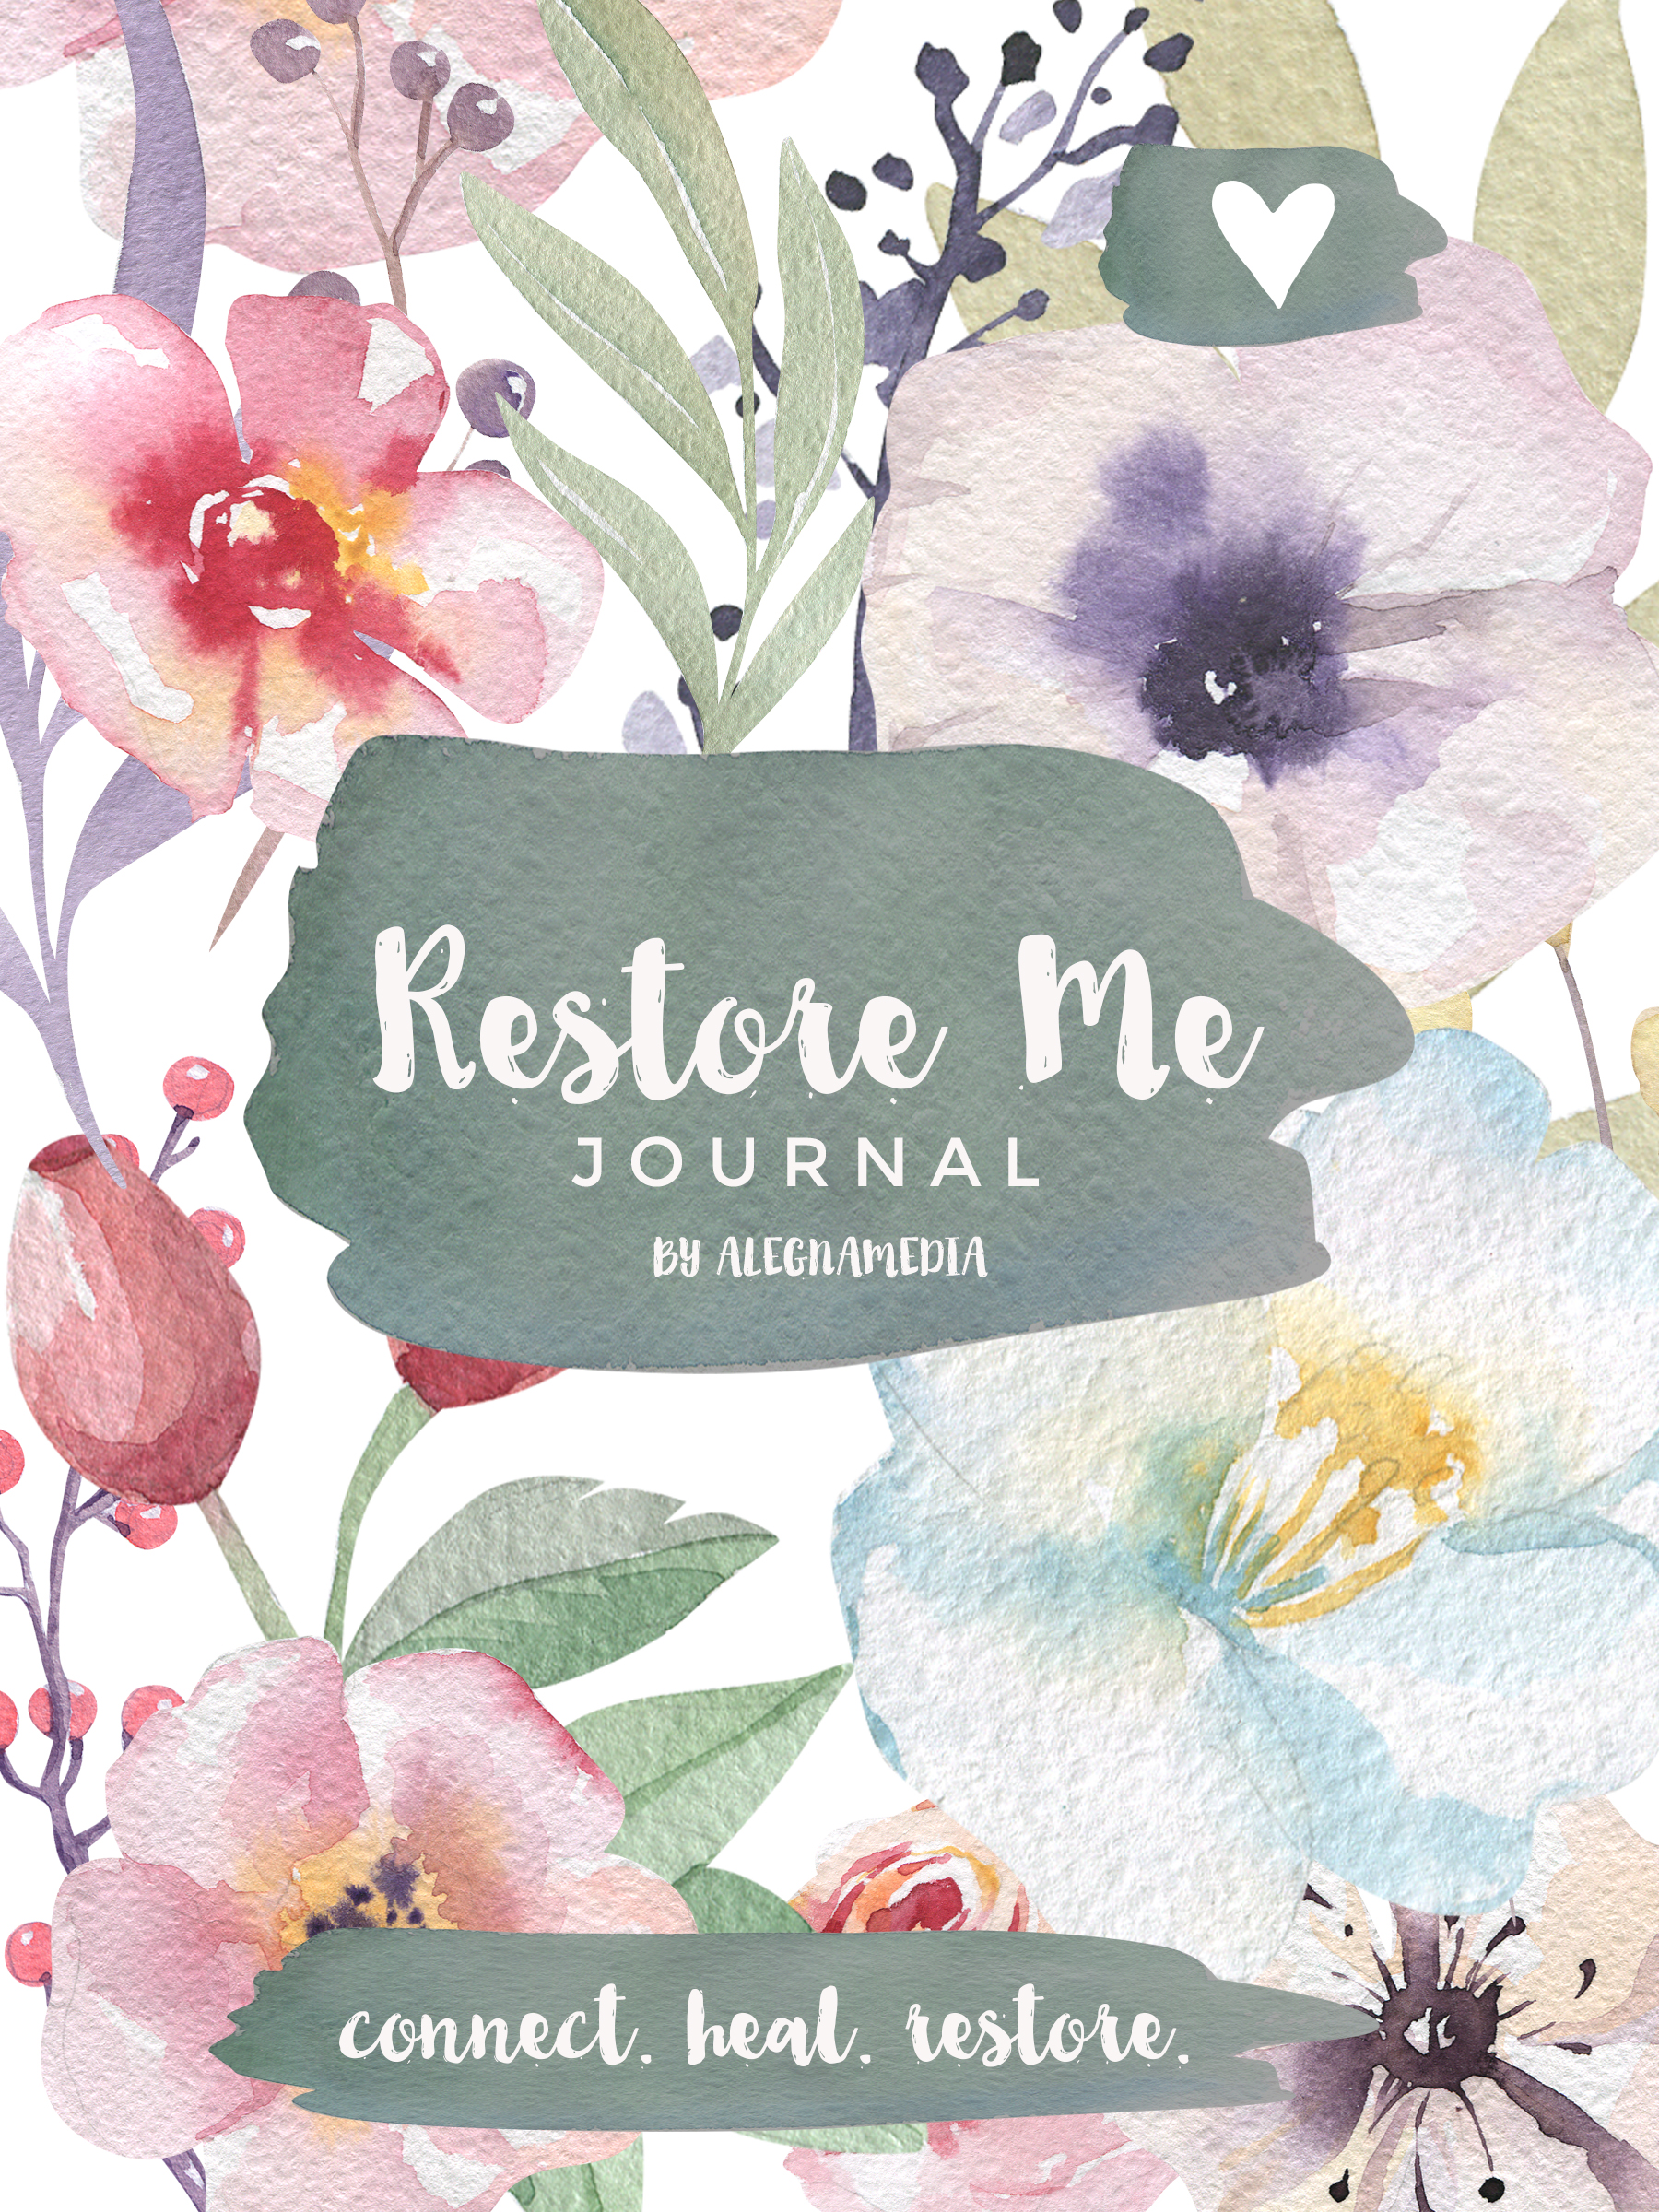 The Restore Me Journal by ALEGNAMEDIA AND CONNECTED WOMAN MAGAZINE